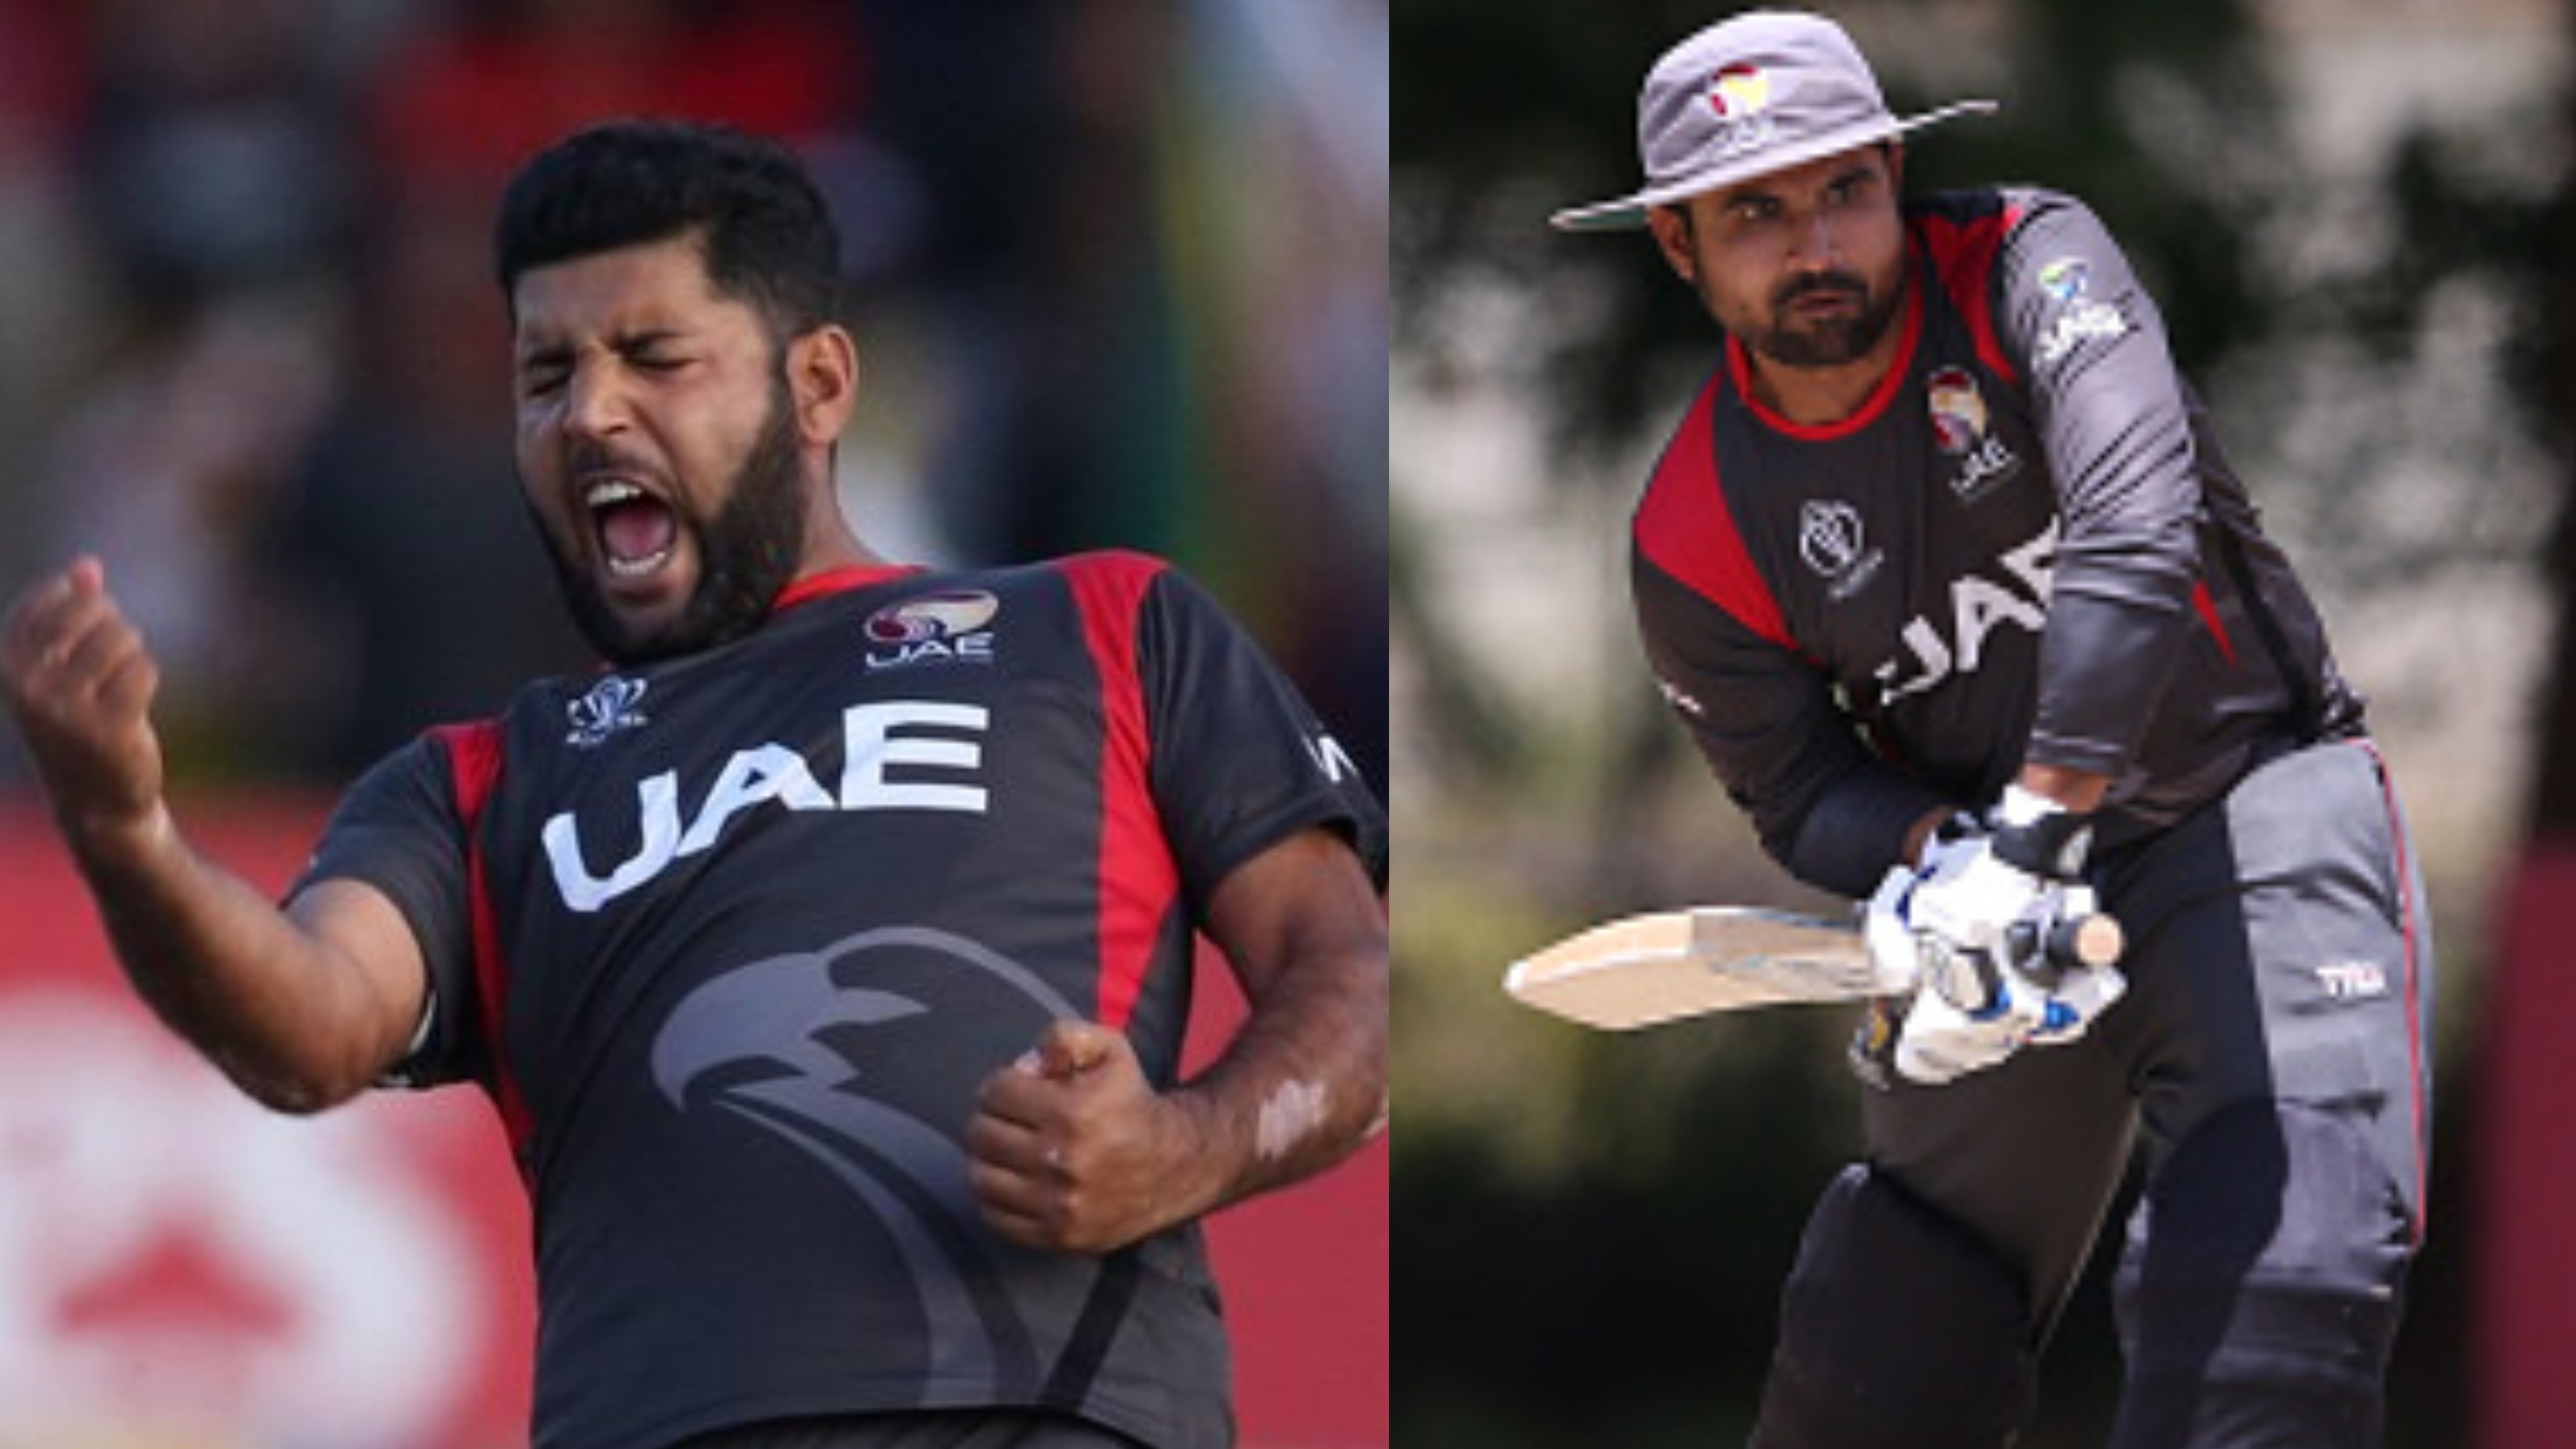 UAE's Mohammed Naveed and Shaiman Anwar found guilty of match-fixing offences; suspended by ICC